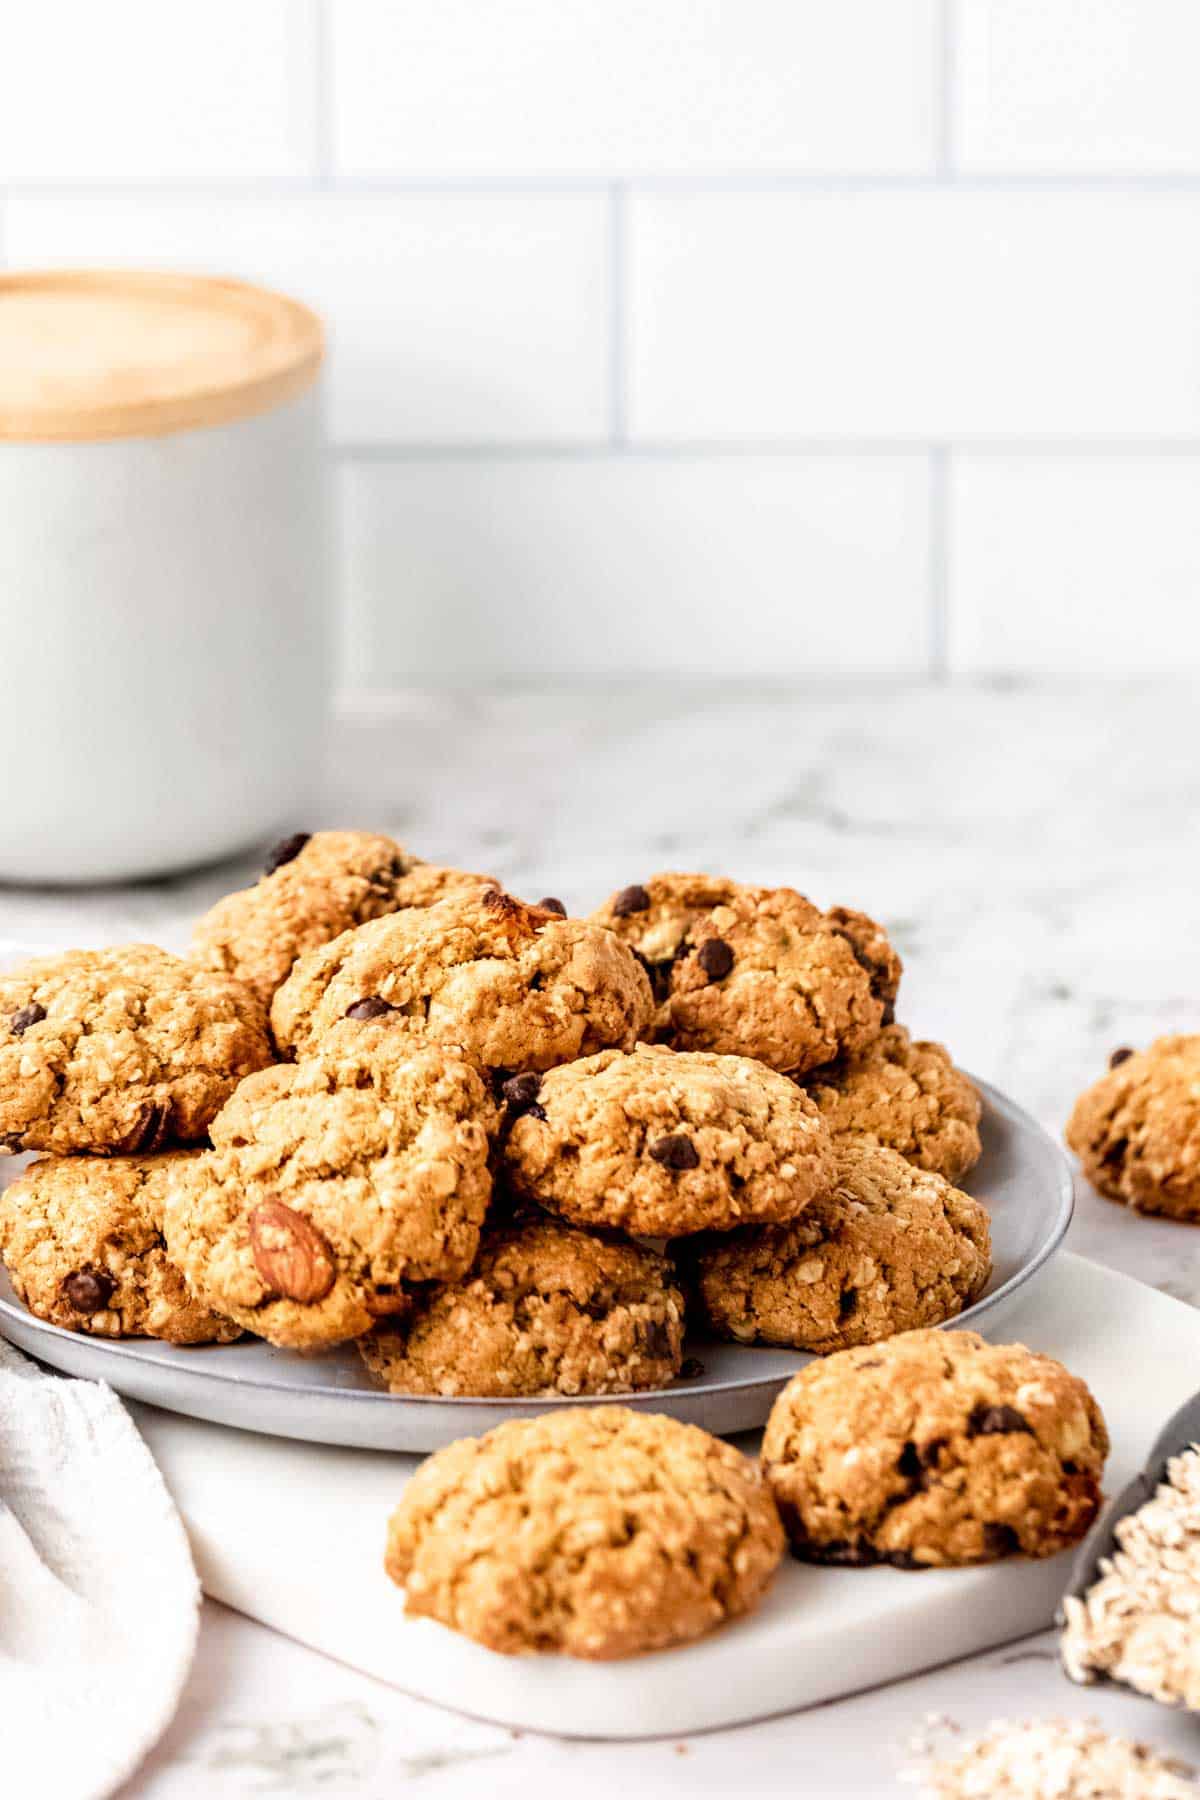 Assorted gluten-free trail mix cookies piled on a grey plate, on a white marble countertop with a cookie jar in the background.